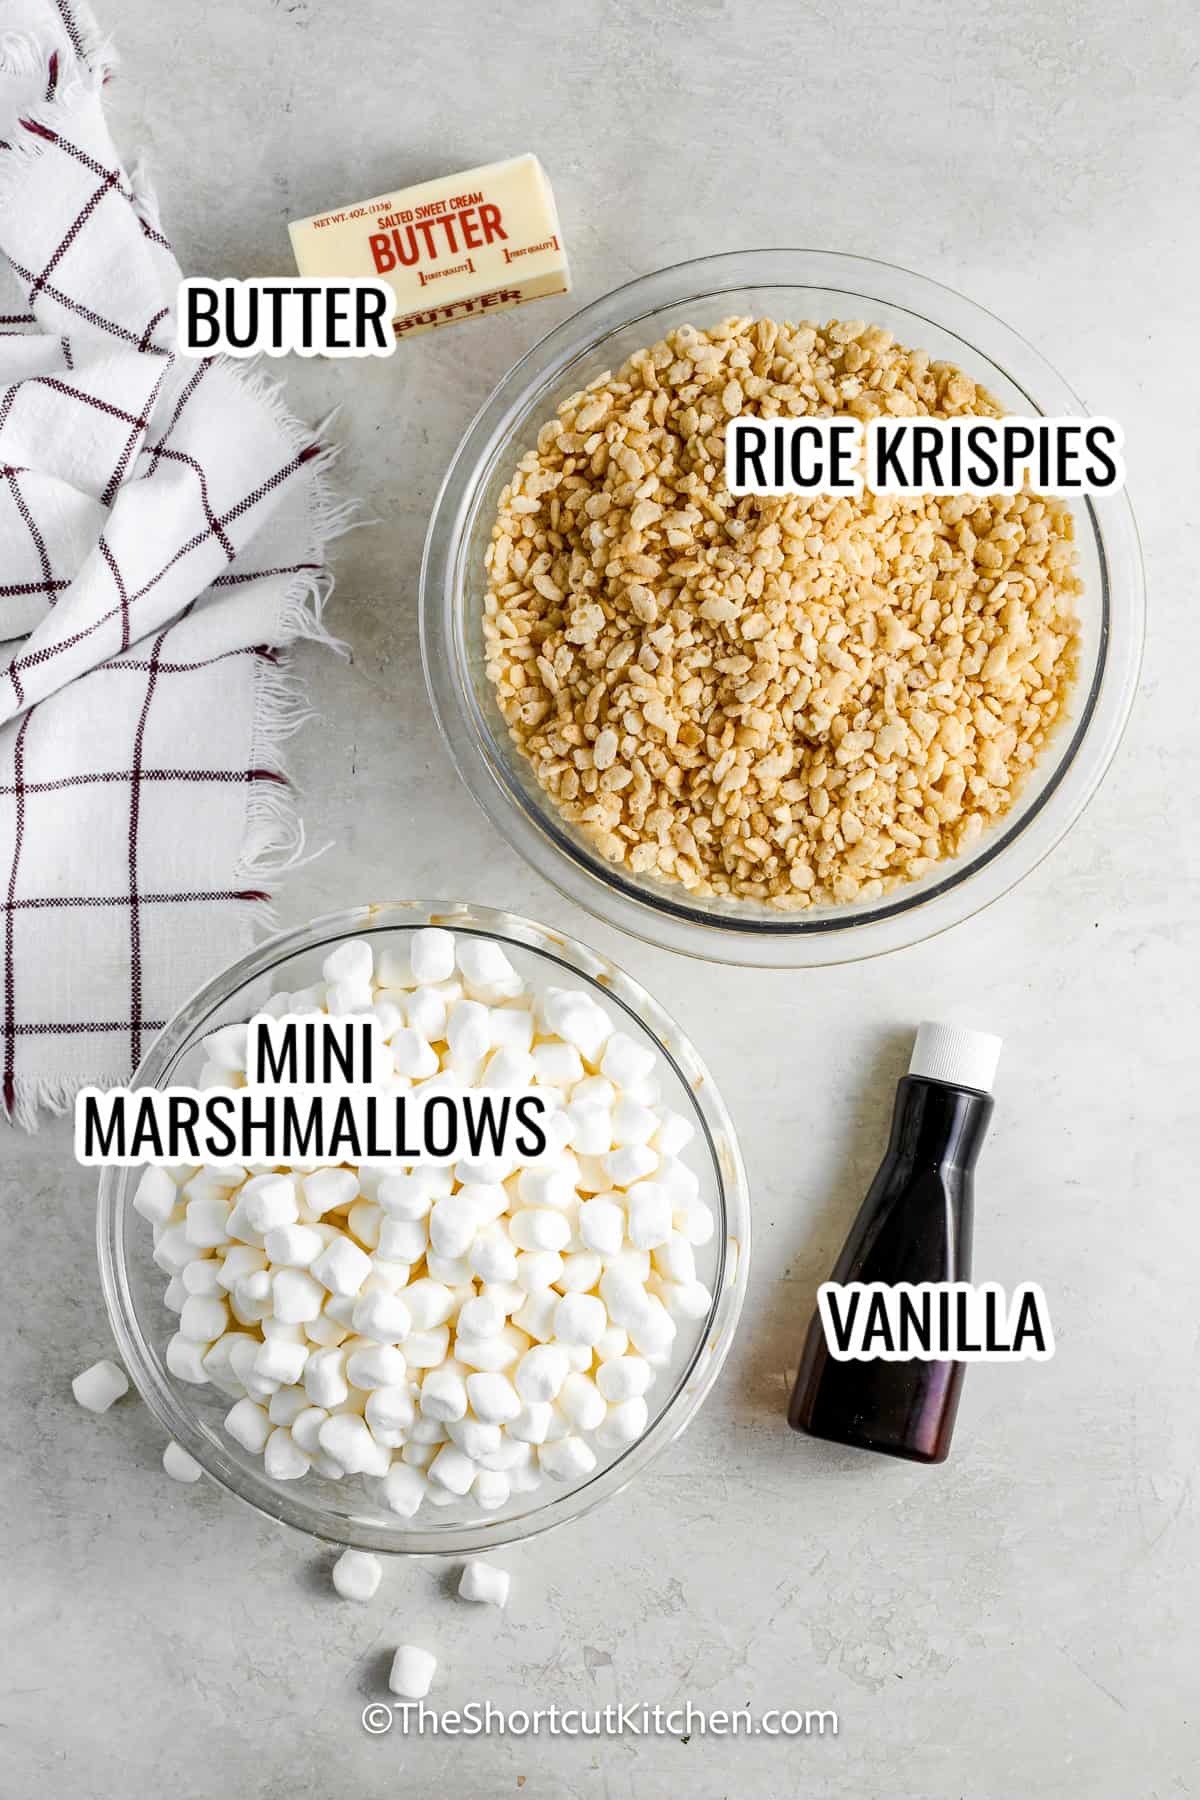 ingredients assembled to make rice krispies treats, including mini marshmallows, rice krispies cereal, butter, and vanilla,